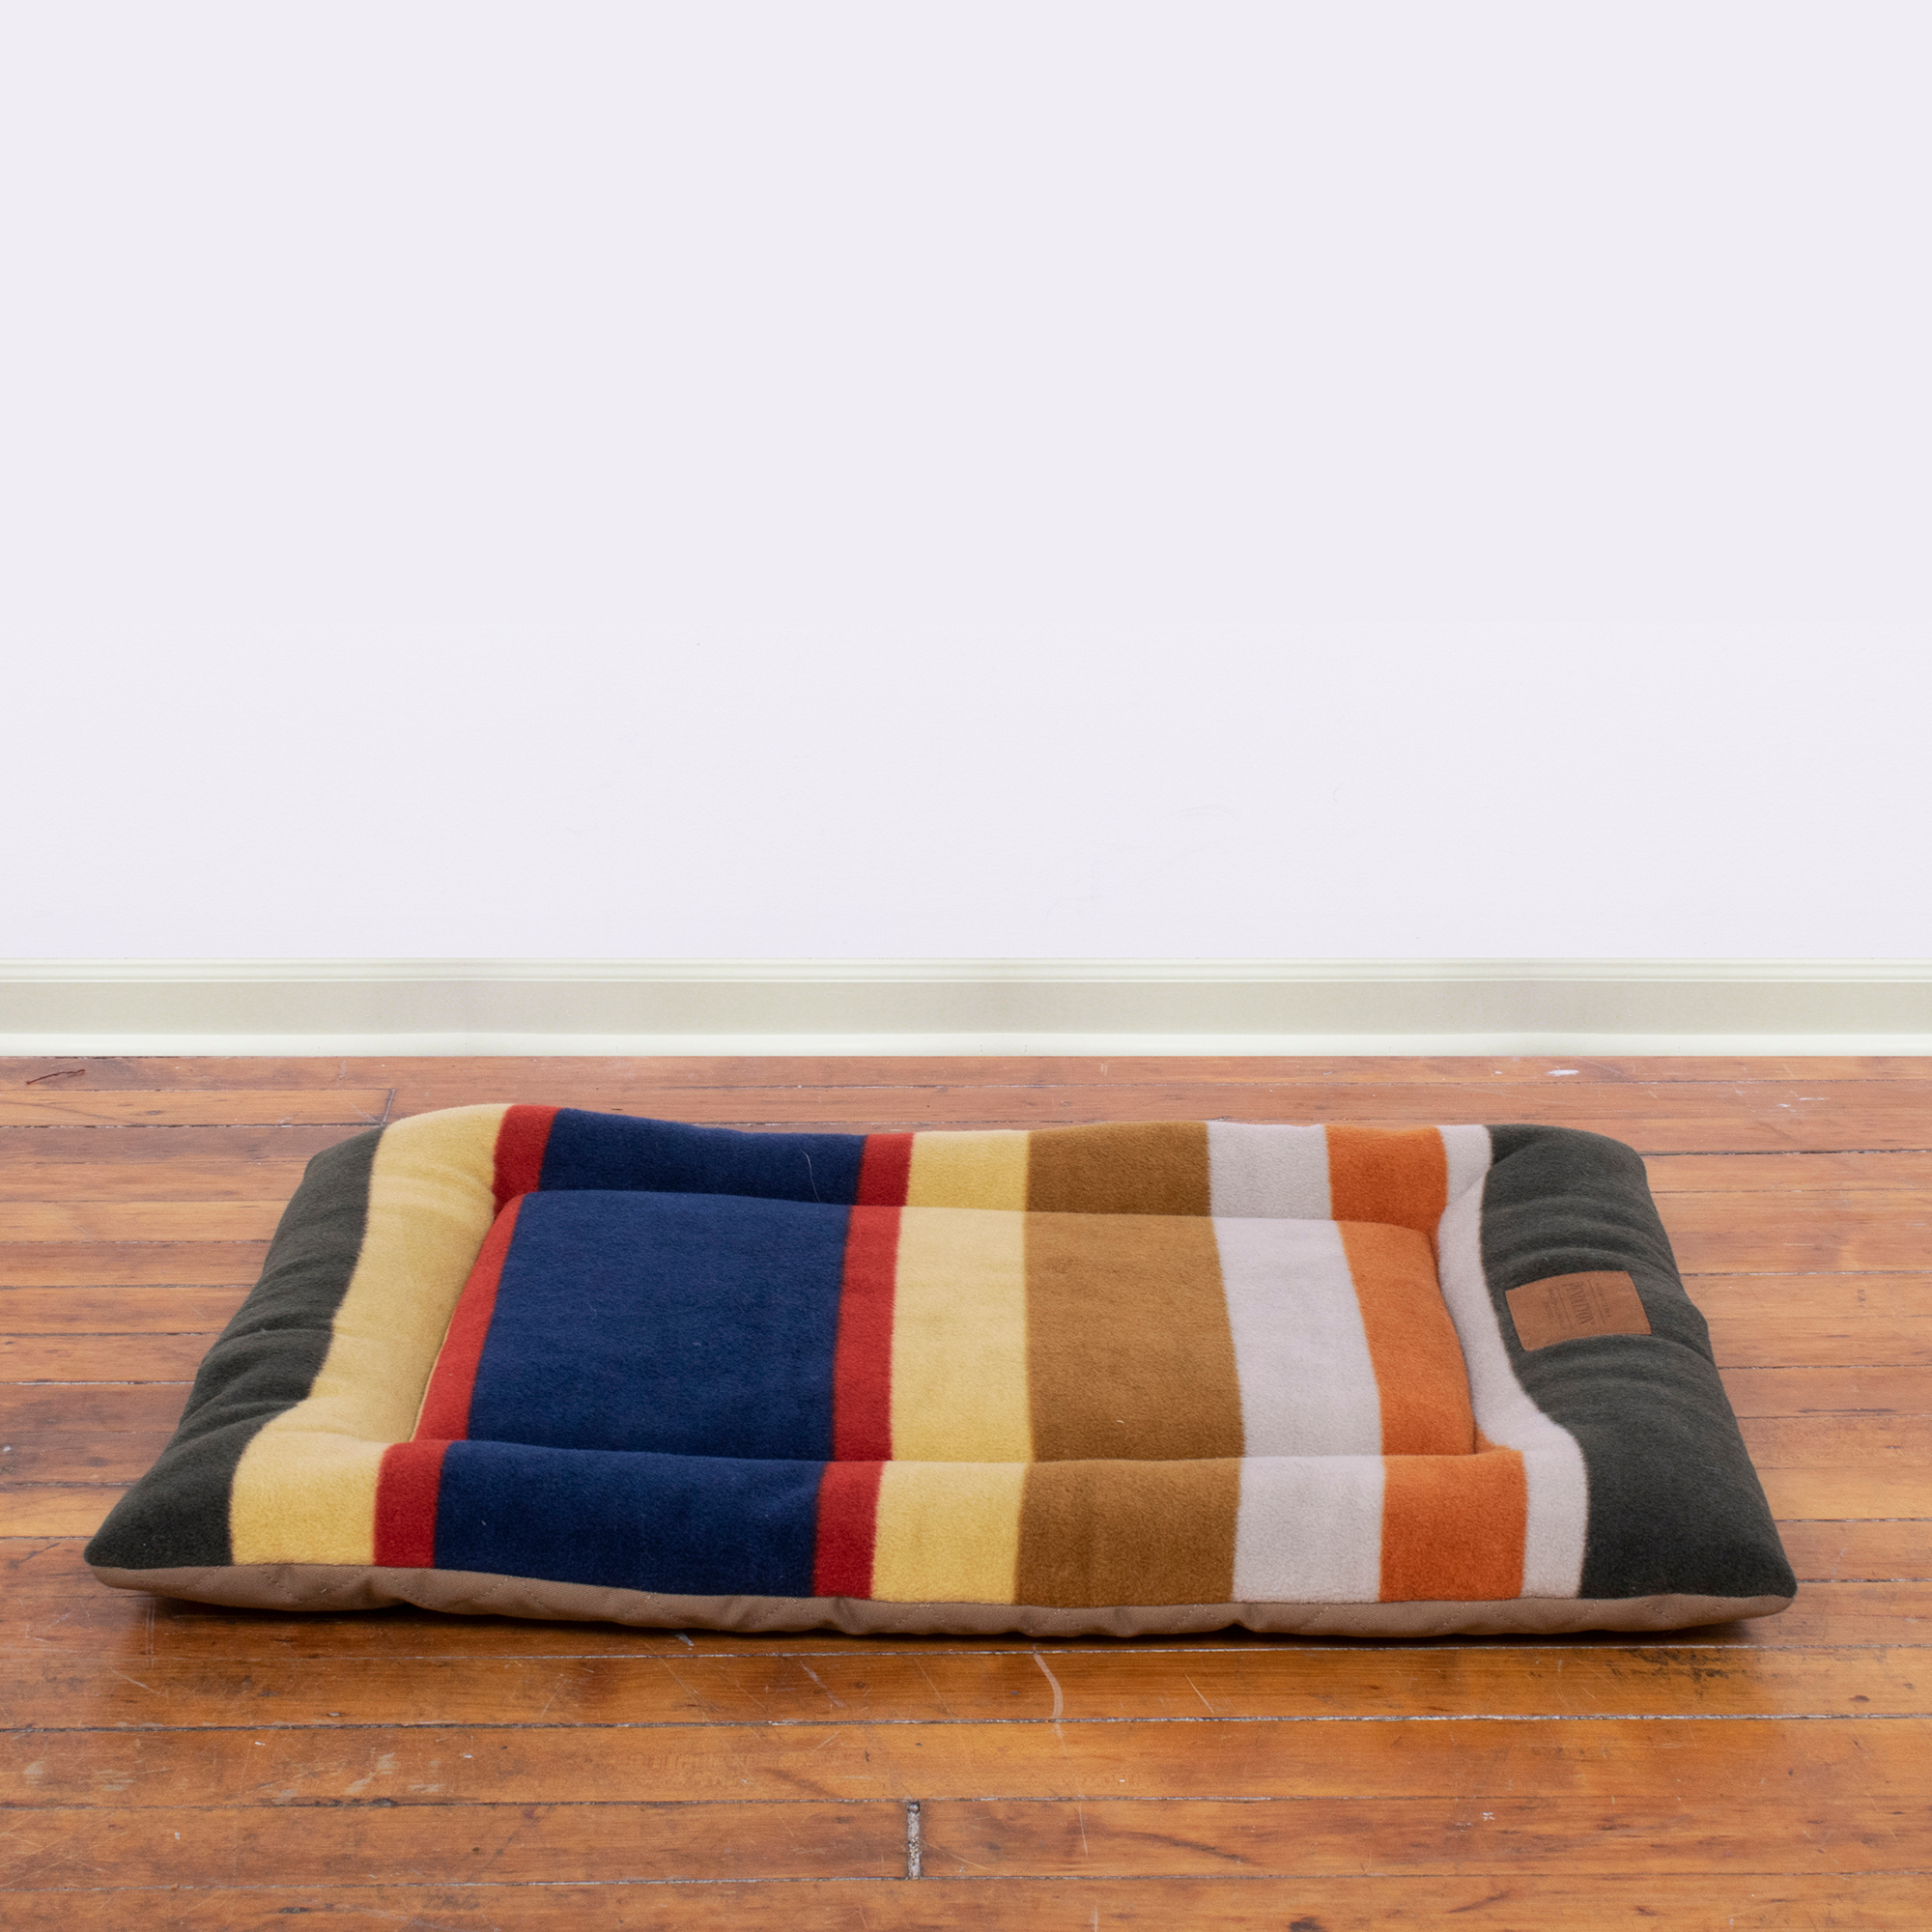 PENDLETON-DOG-BED-BADLANDS-NATIONAL-PARK-KENNEL-CRATE-MAT-WHITE-RED-YELLOW-GREEN-BLUE